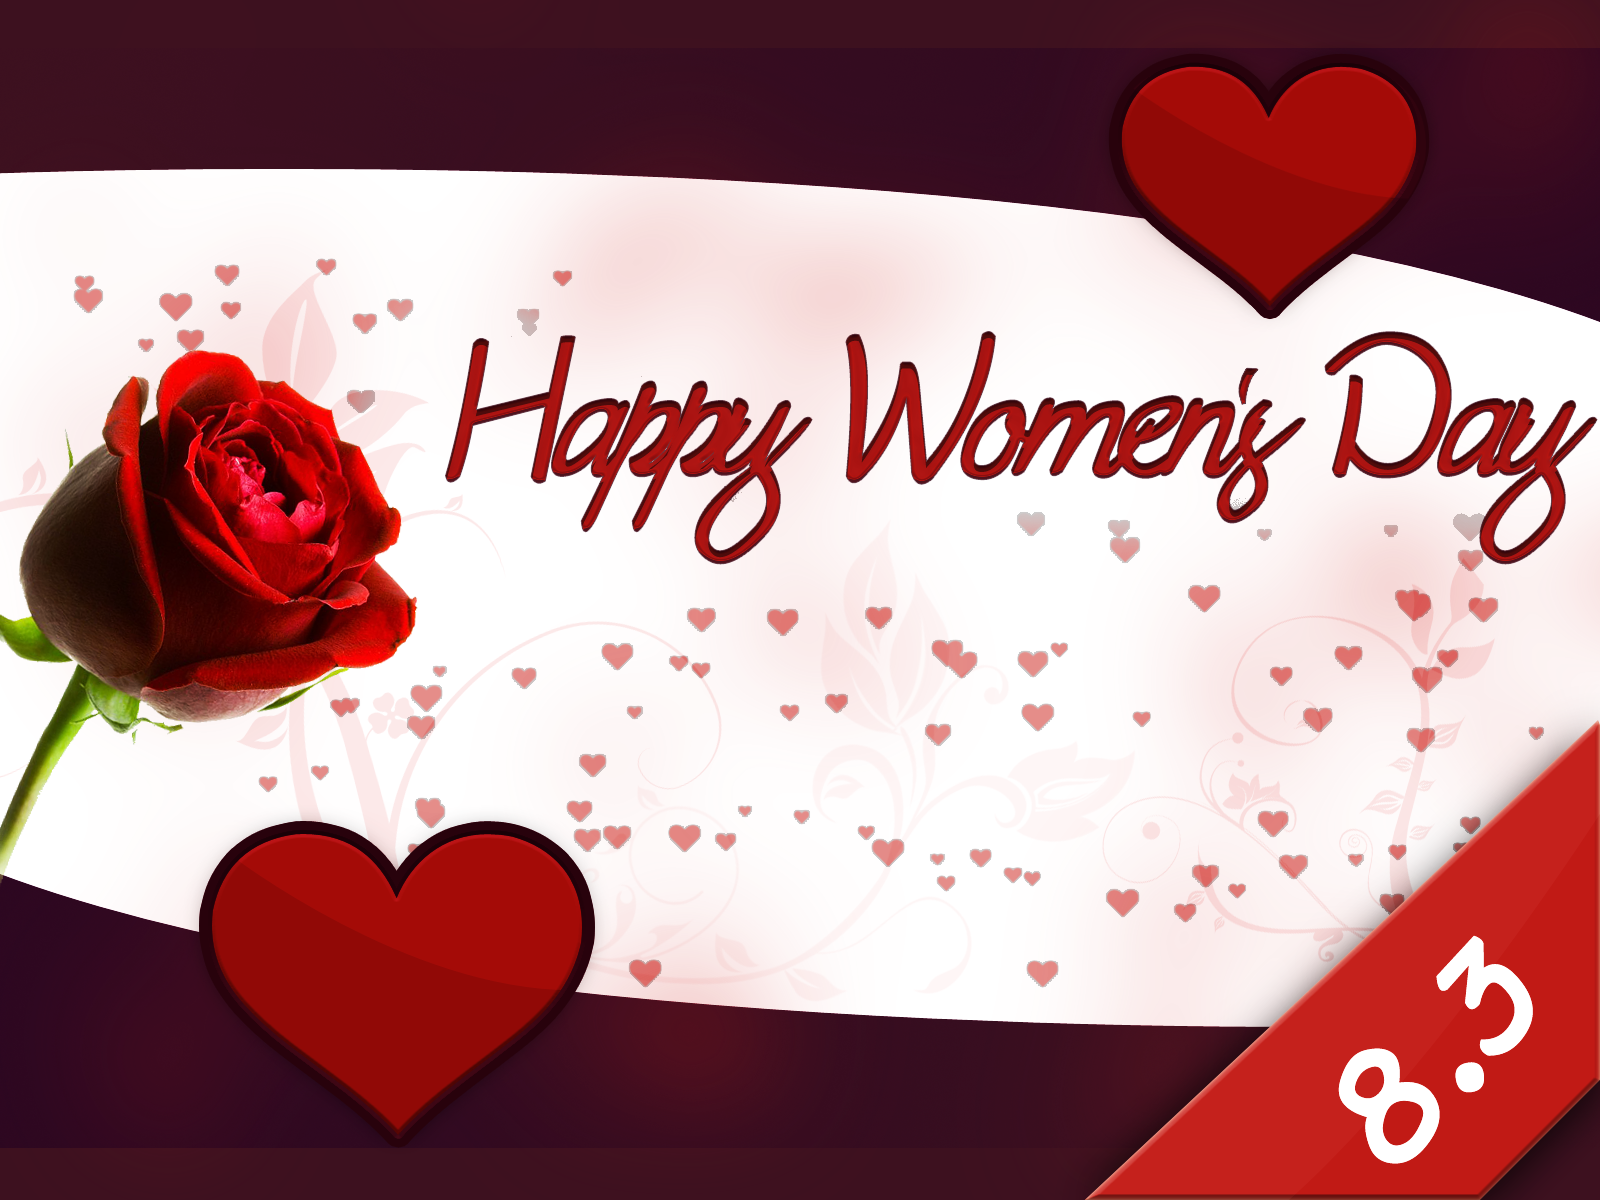 Women's Day Wallpaper and Background Imagex1200